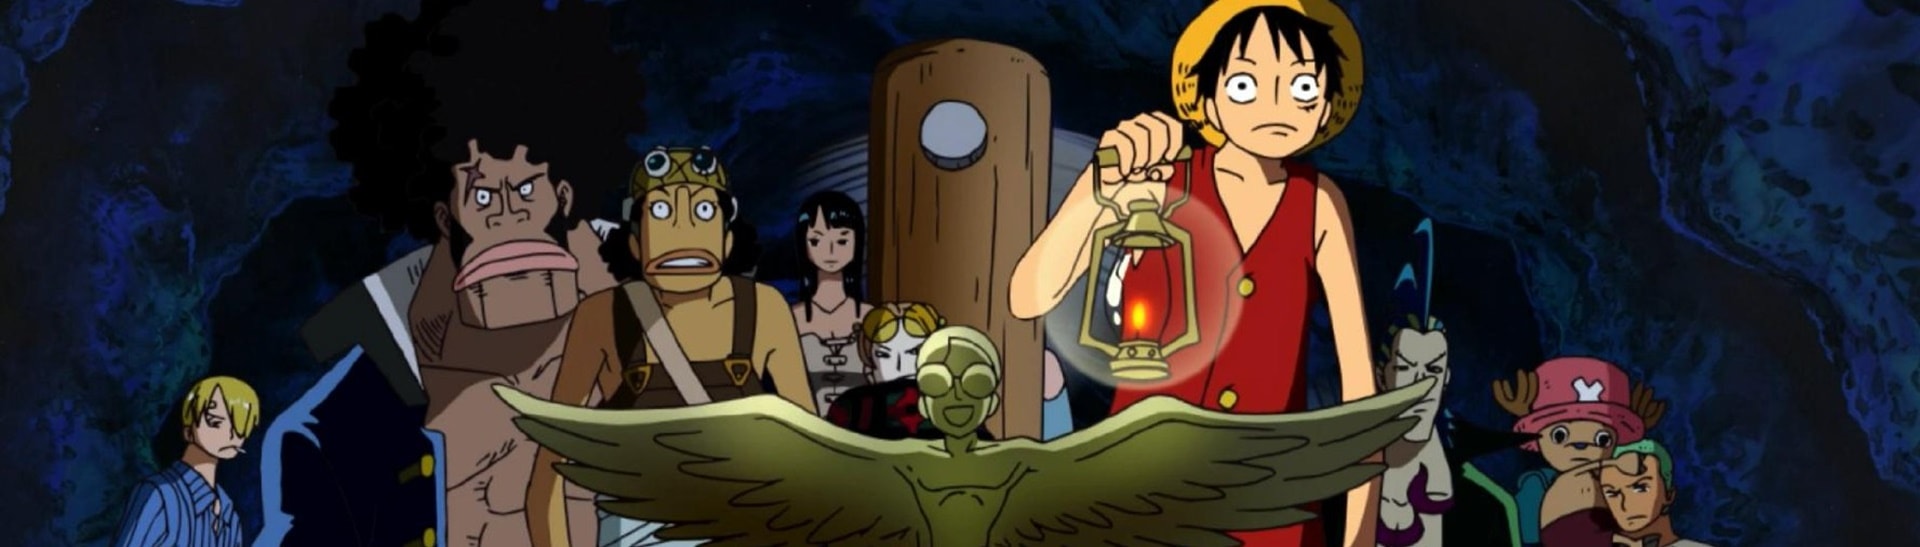 link one piece full